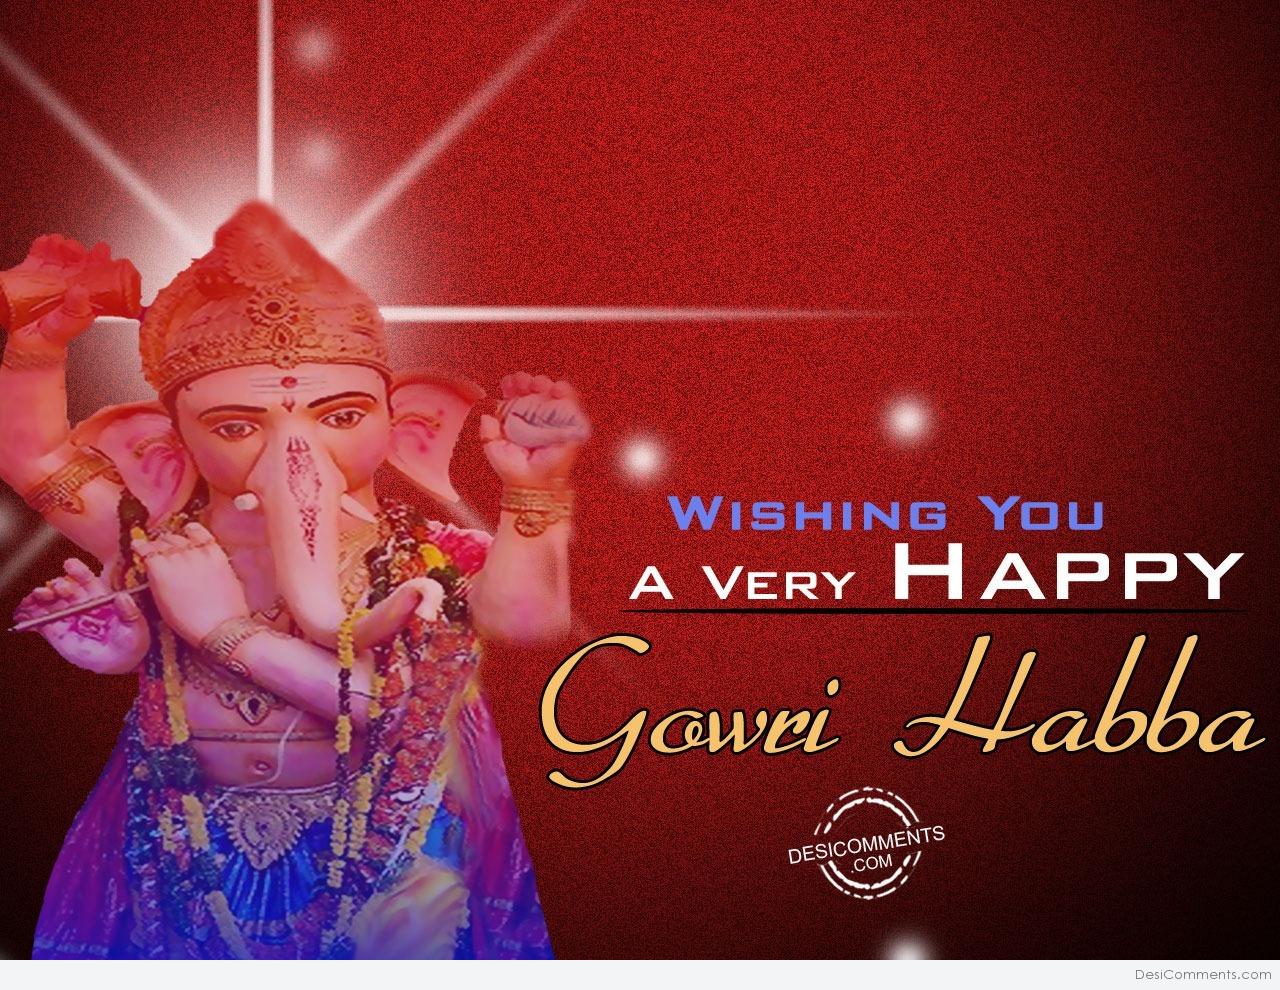 Great wishes on Gowri Habba - DesiComments.com